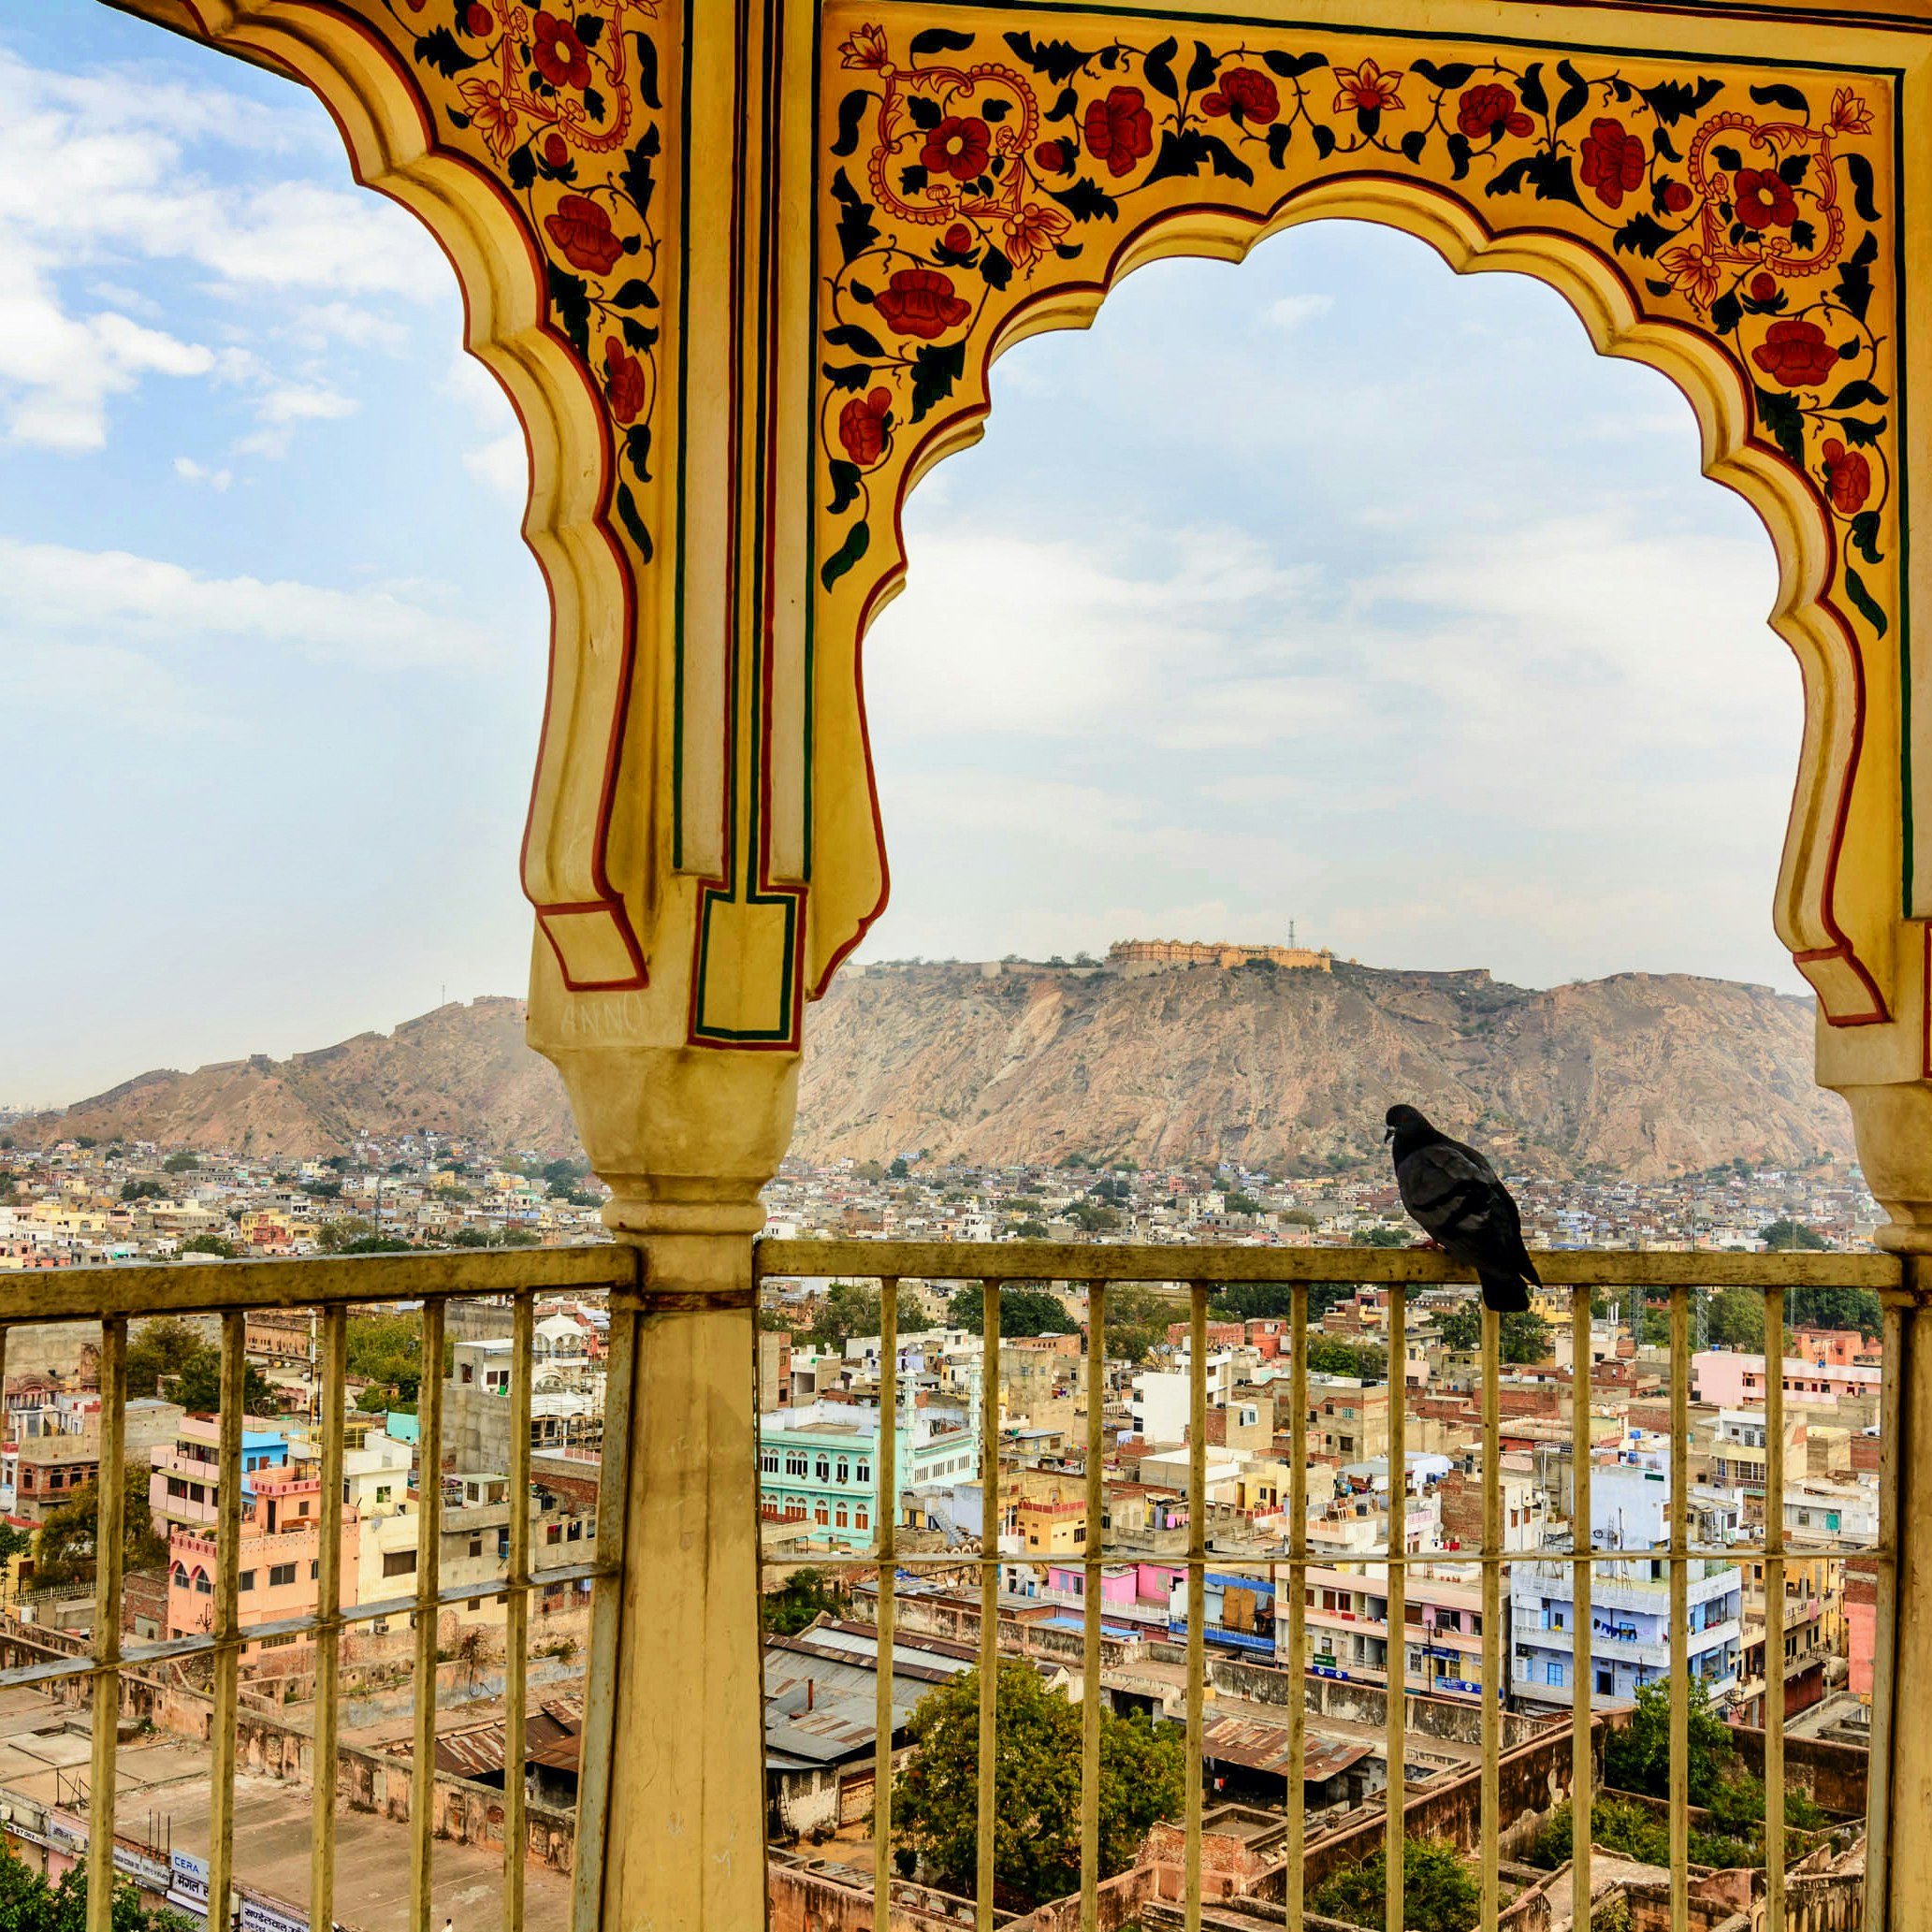 The view from Iswari Minar Swarga Sal Minaret in Jaipur, India; Shutterstock ID 293086646; Your name (First / Last): Josh Vogel; GL account no.: 56530; Netsuite department name: Online Design; Full Product or Project name including edition: Digital Content/Sights